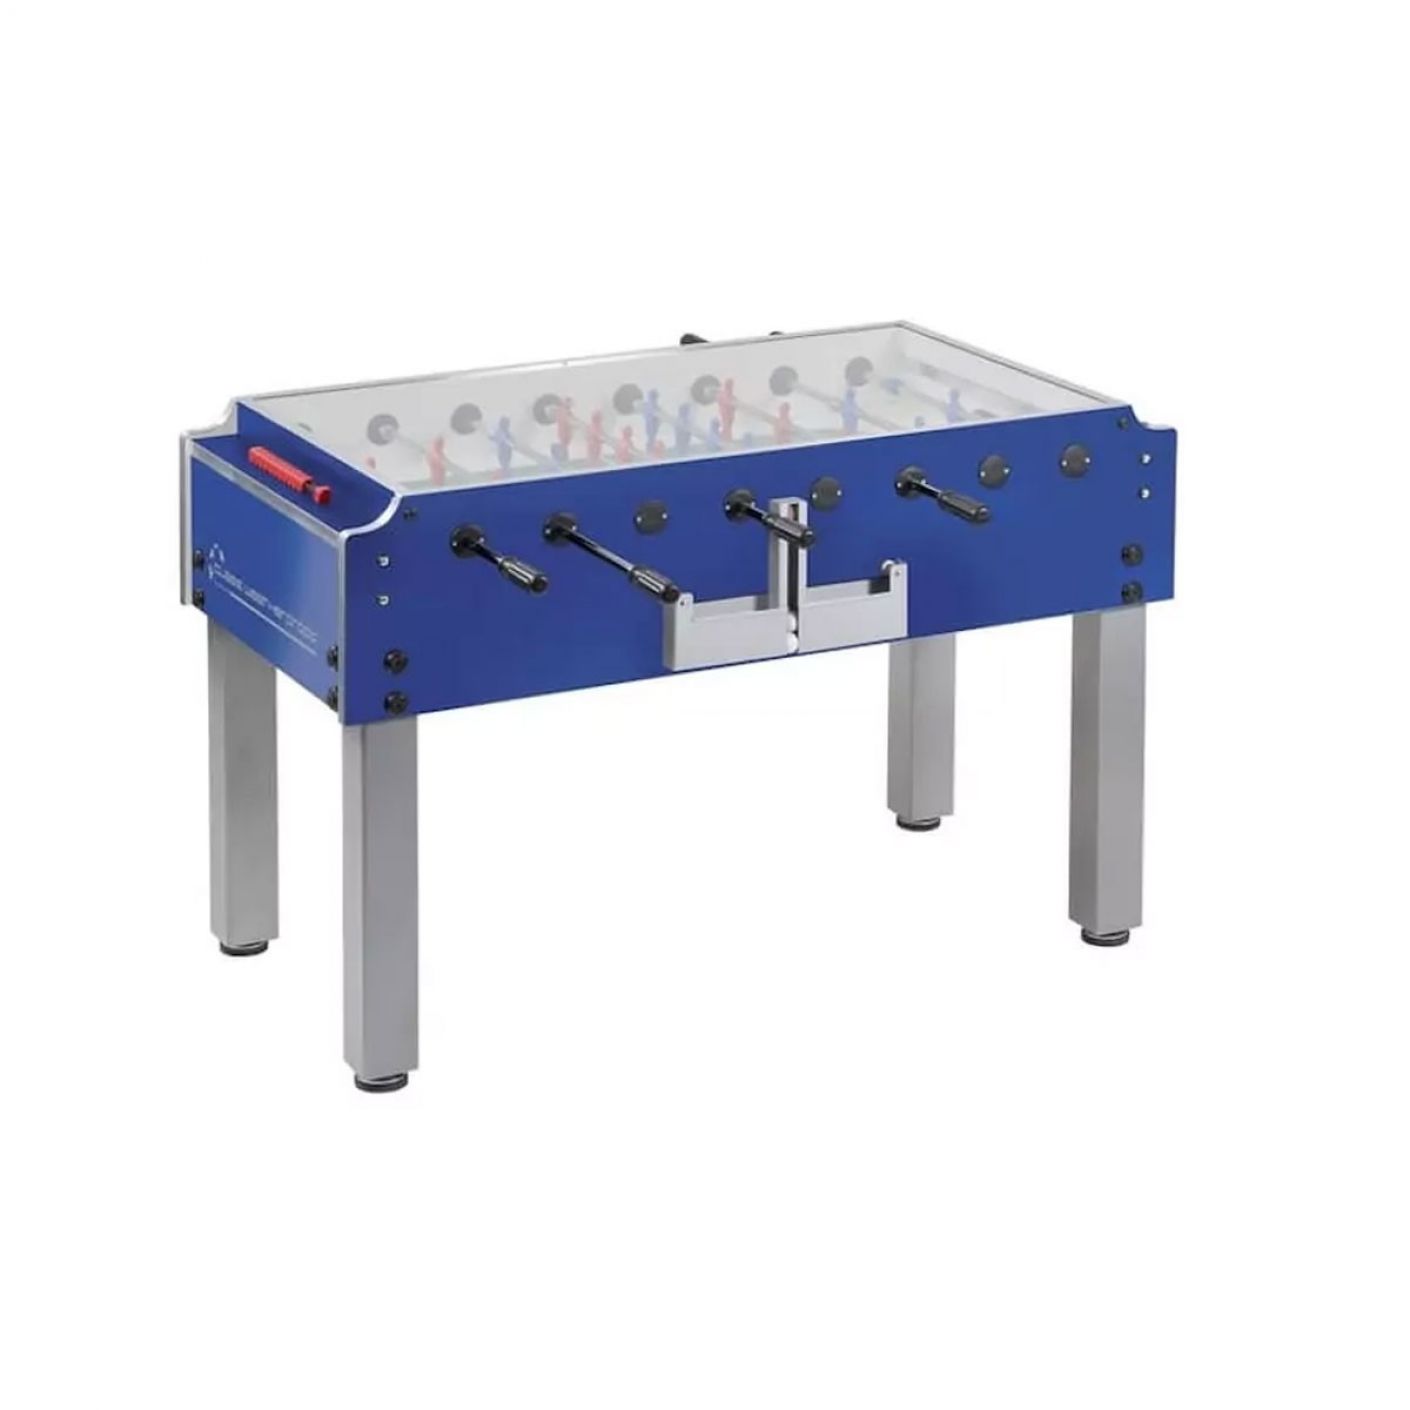 Garlando Table Football Class Weatherproof with retracting temples, with upper glass